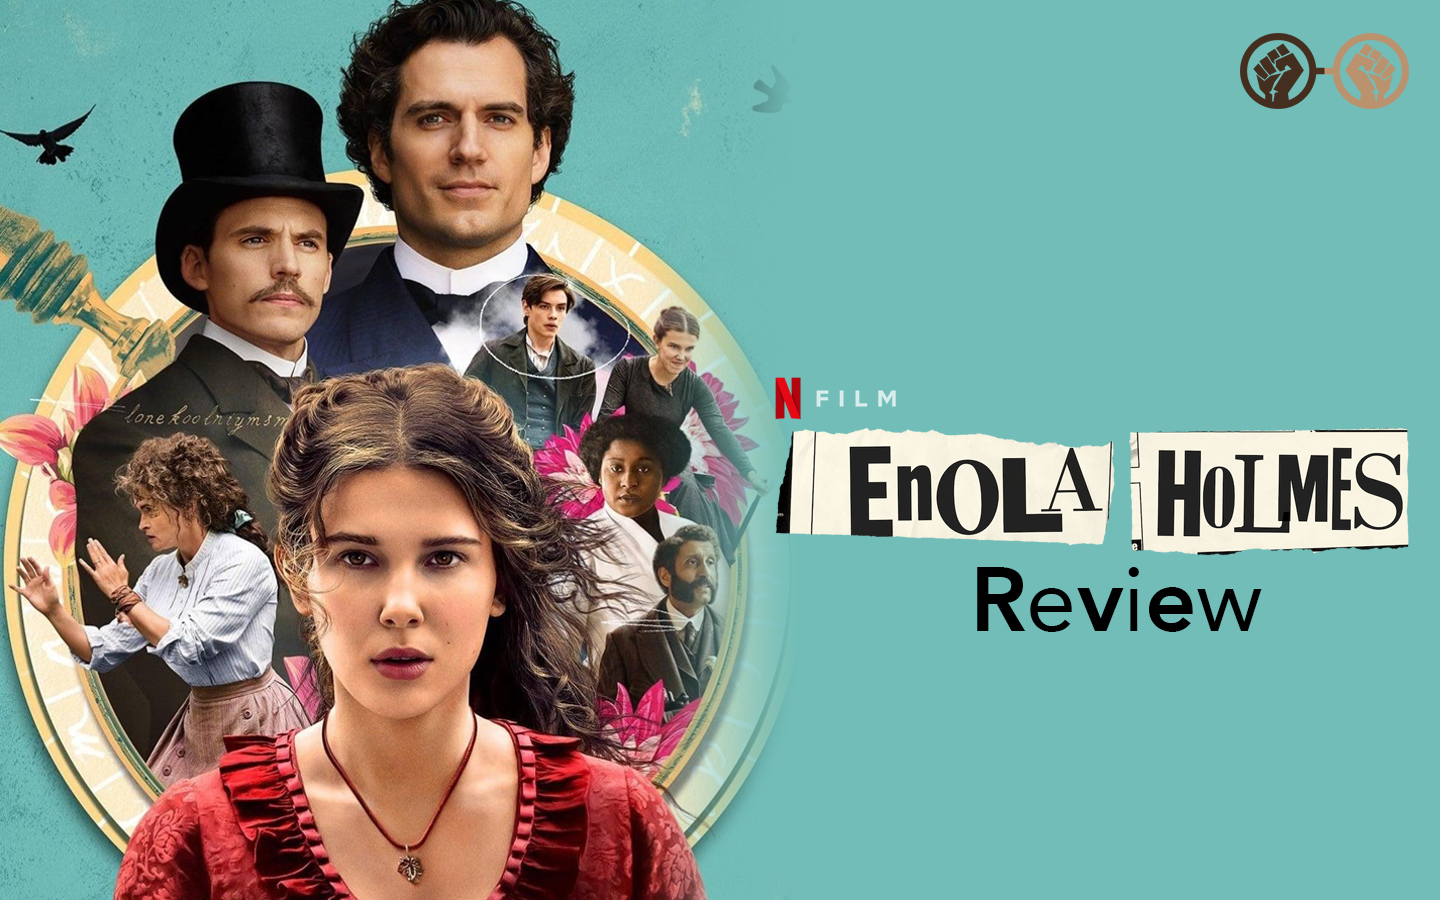 Millie Bobby Brown is a Charismatic Lead in the Delightful and Fun ‘Enola Holmes’ – Review